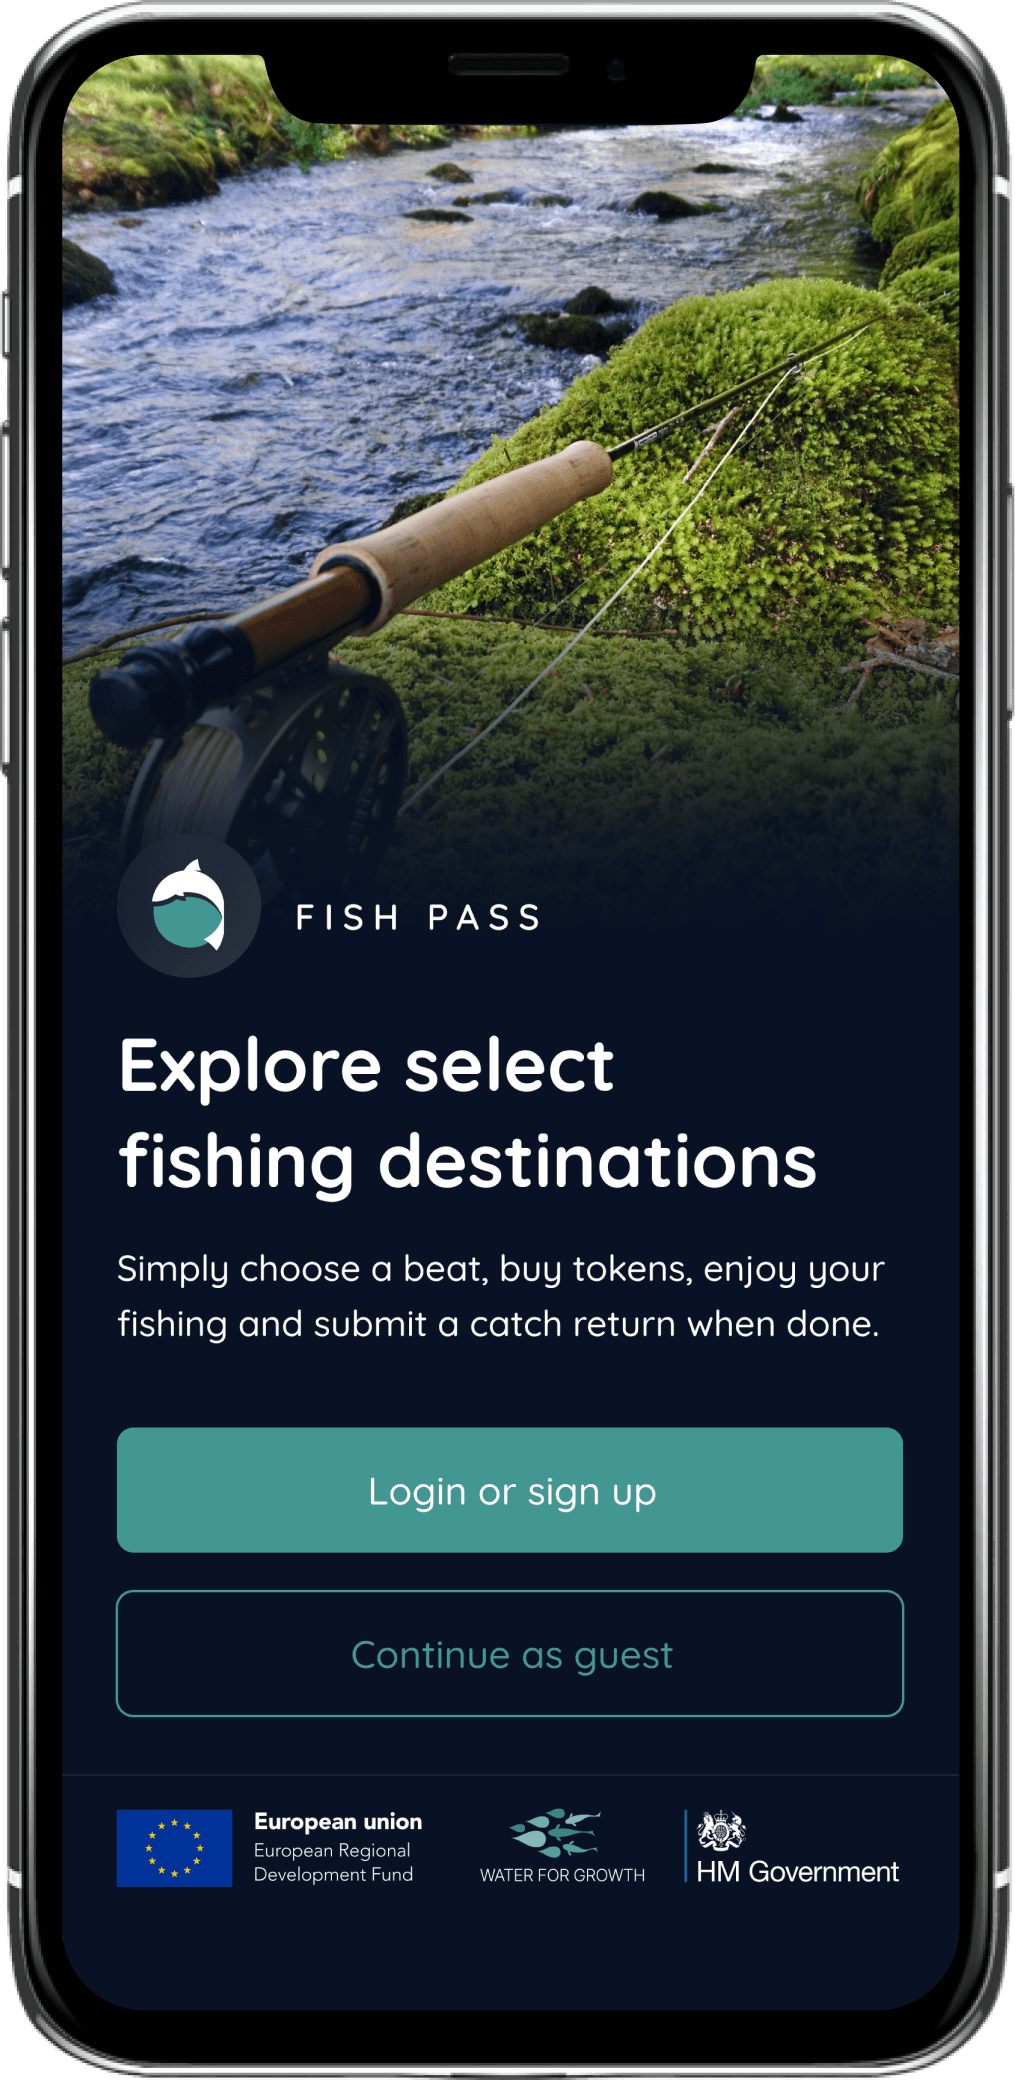 Features in the Fish Pass app